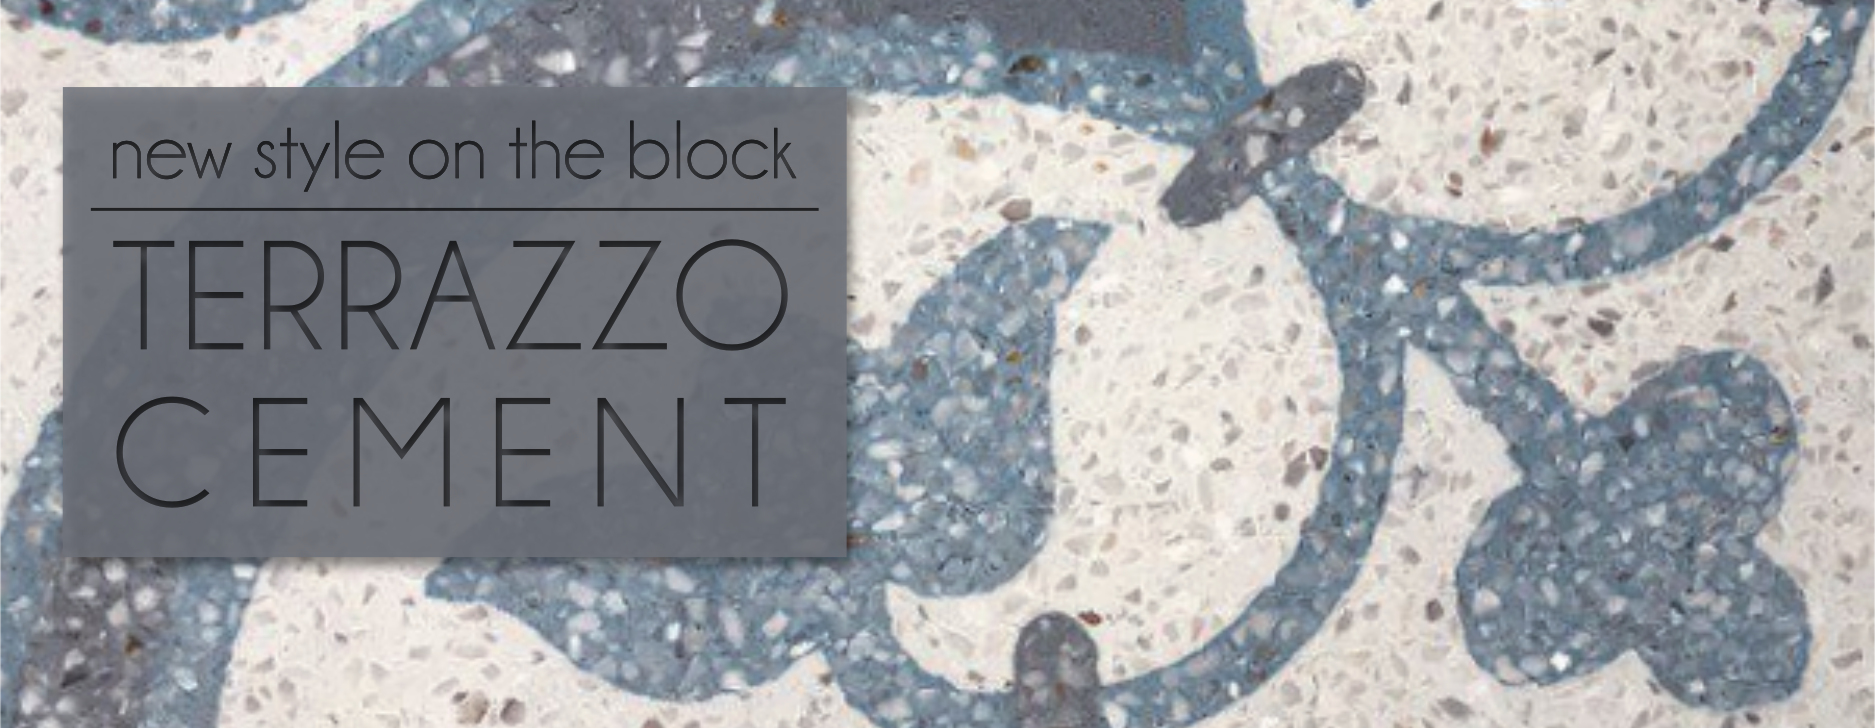 new style on the block: terrazzo cement tile 